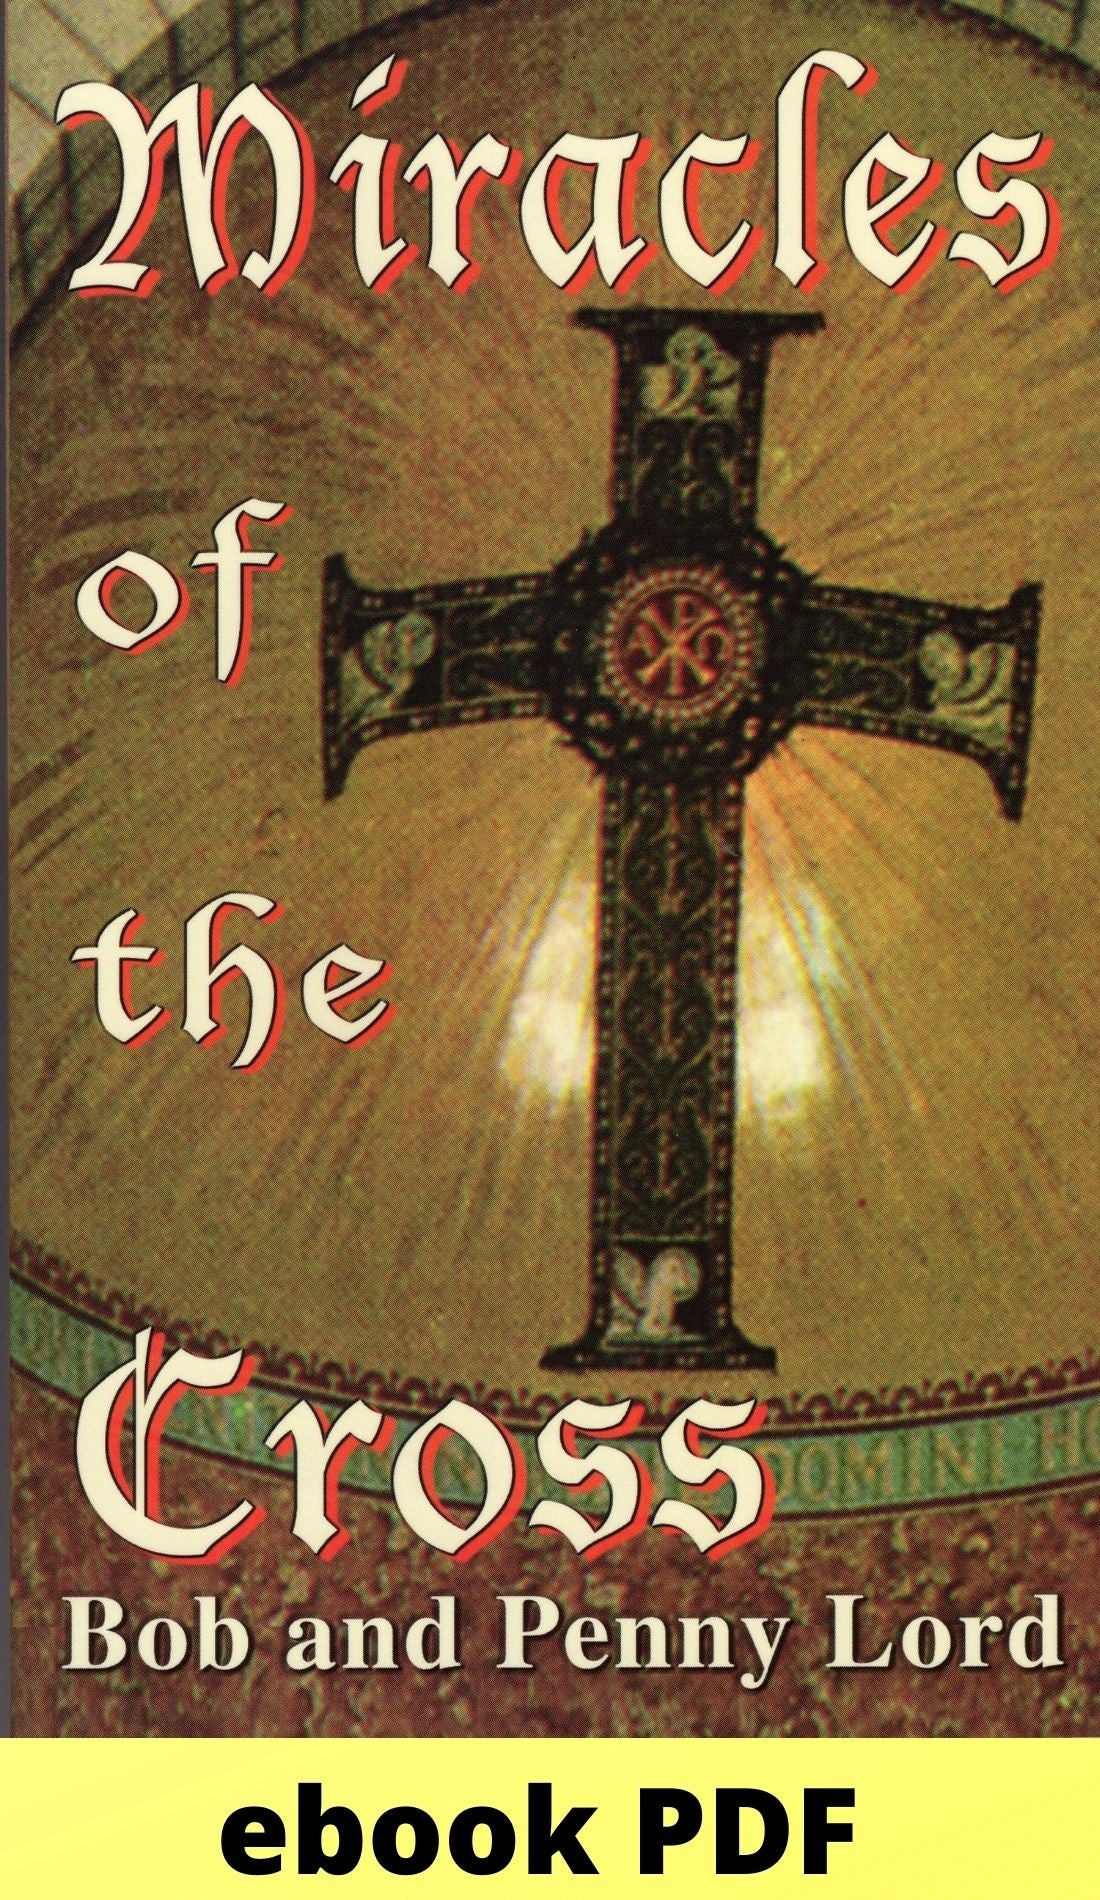 Miracles of the Cross ebook PDF - Bob and Penny Lord